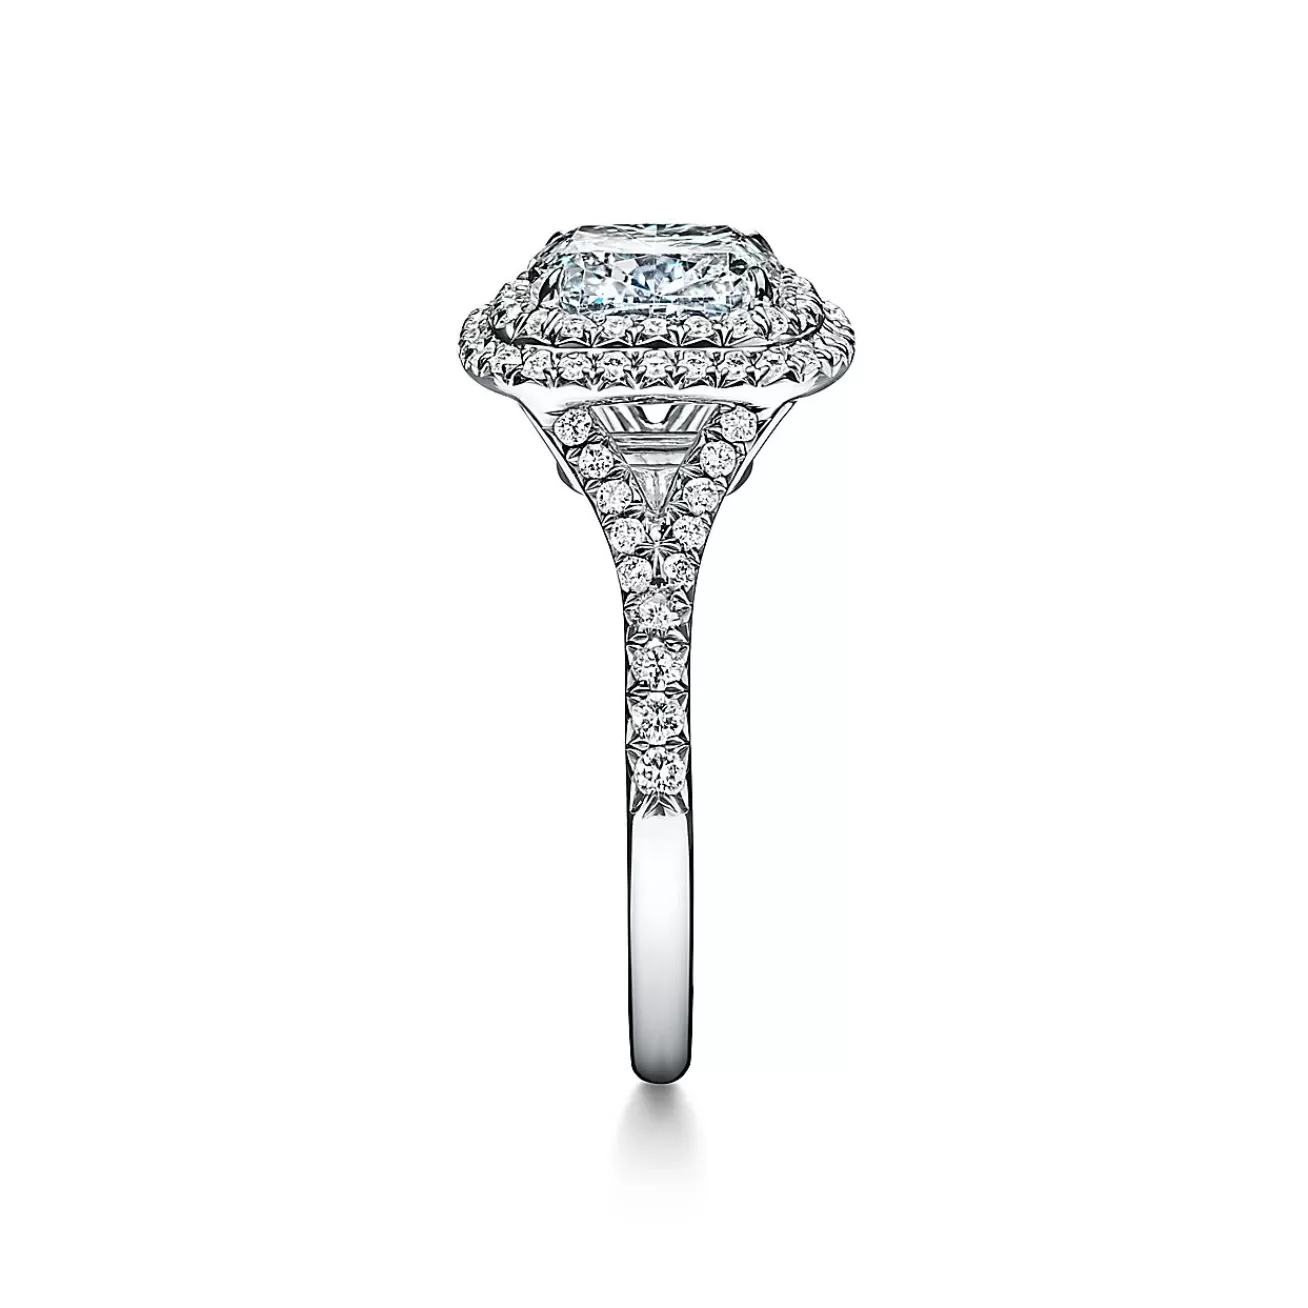 Tiffany & Co. Tiffany Soleste® cushion-cut engagement ring with a diamond band in platinum. | ^ Engagement Rings